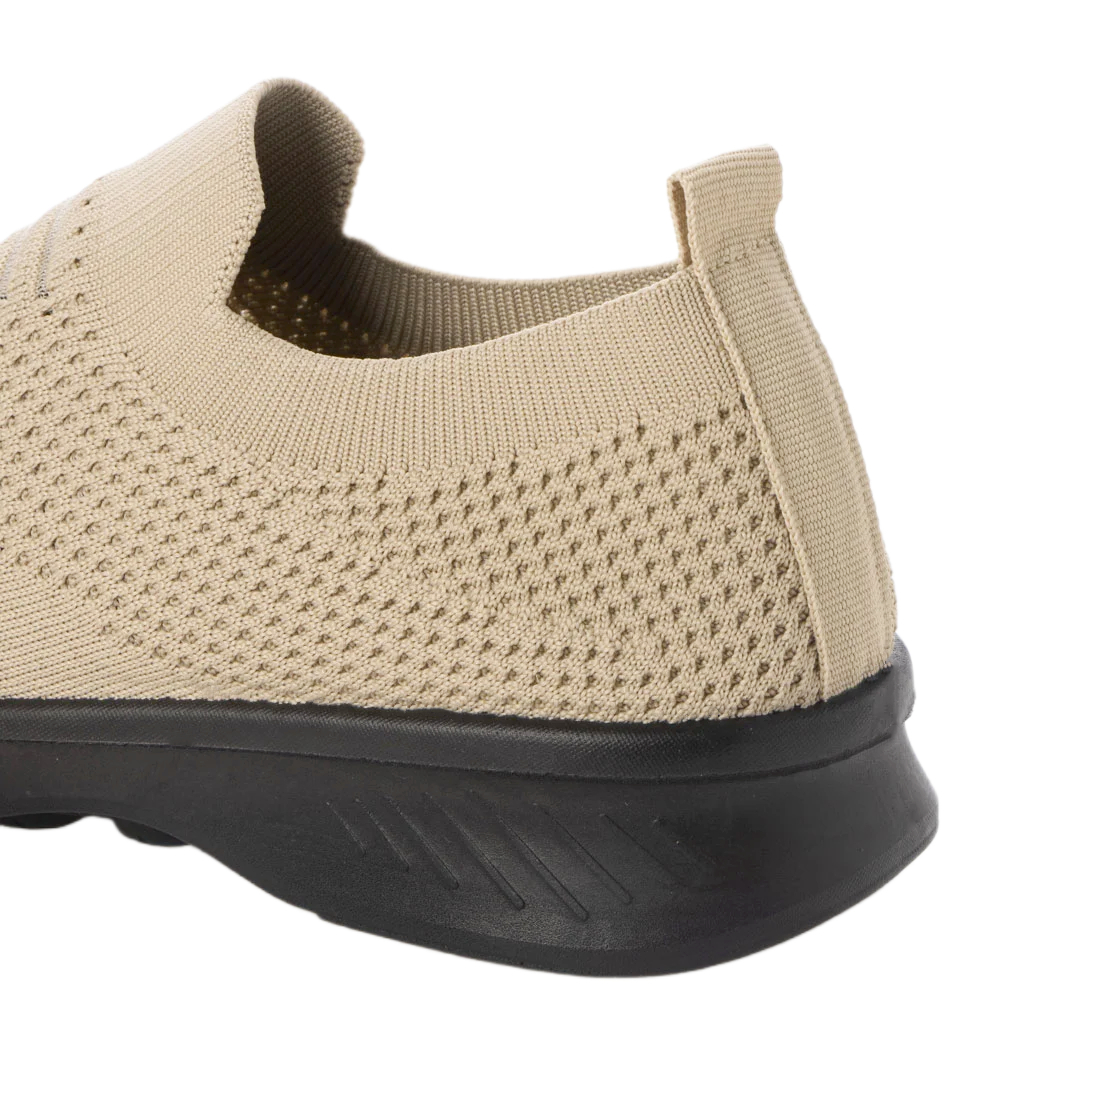  fly knitted sneakers slip-on shoes sneakers new goods [22537-BEG-245]24.5cm walk interior put on footwear 